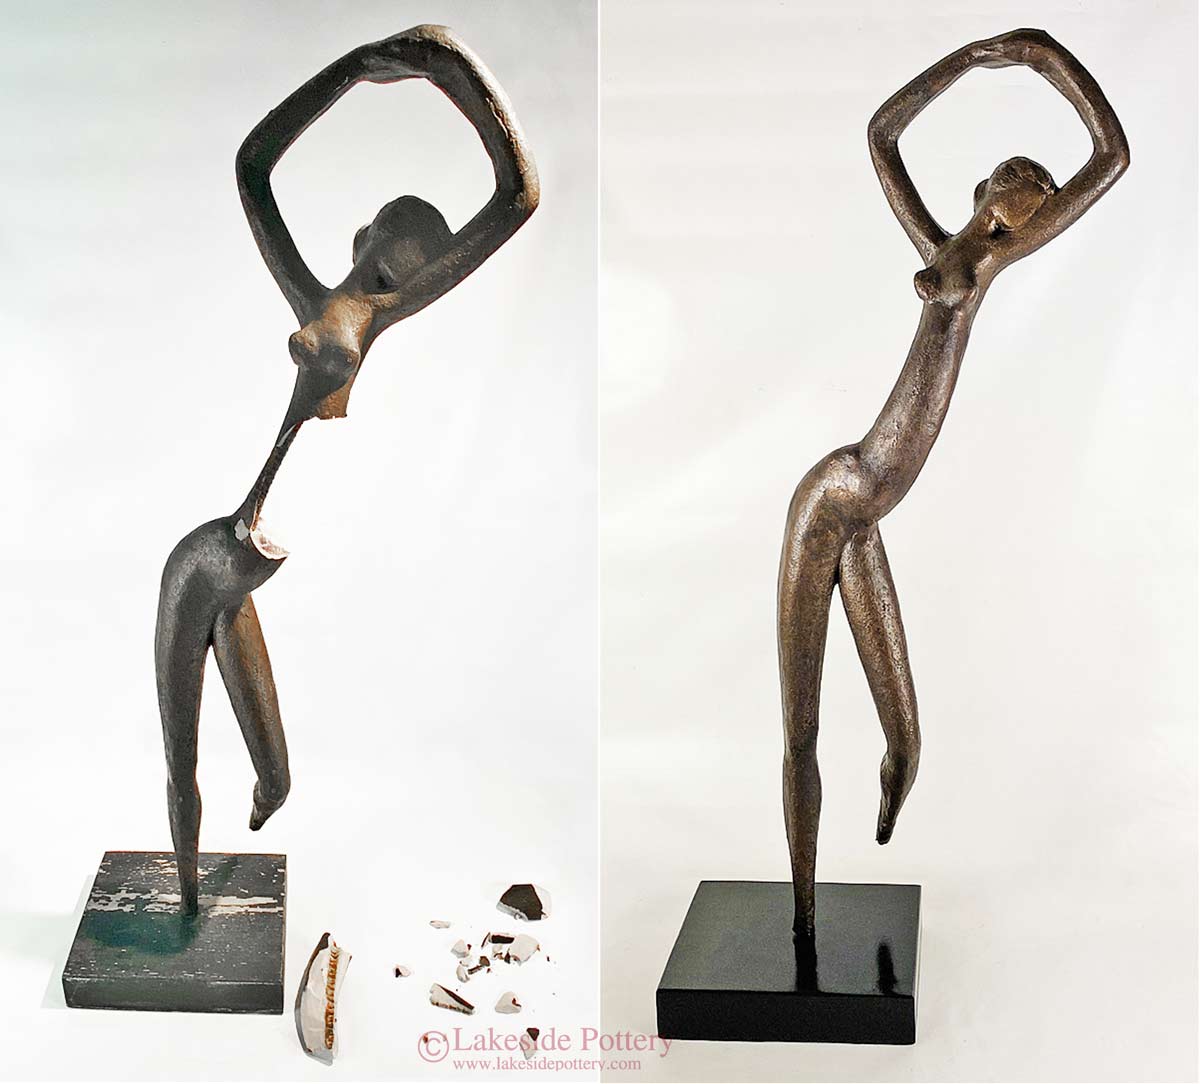 Broken large plaster statue with bronze effect and wooden base - before and after repair